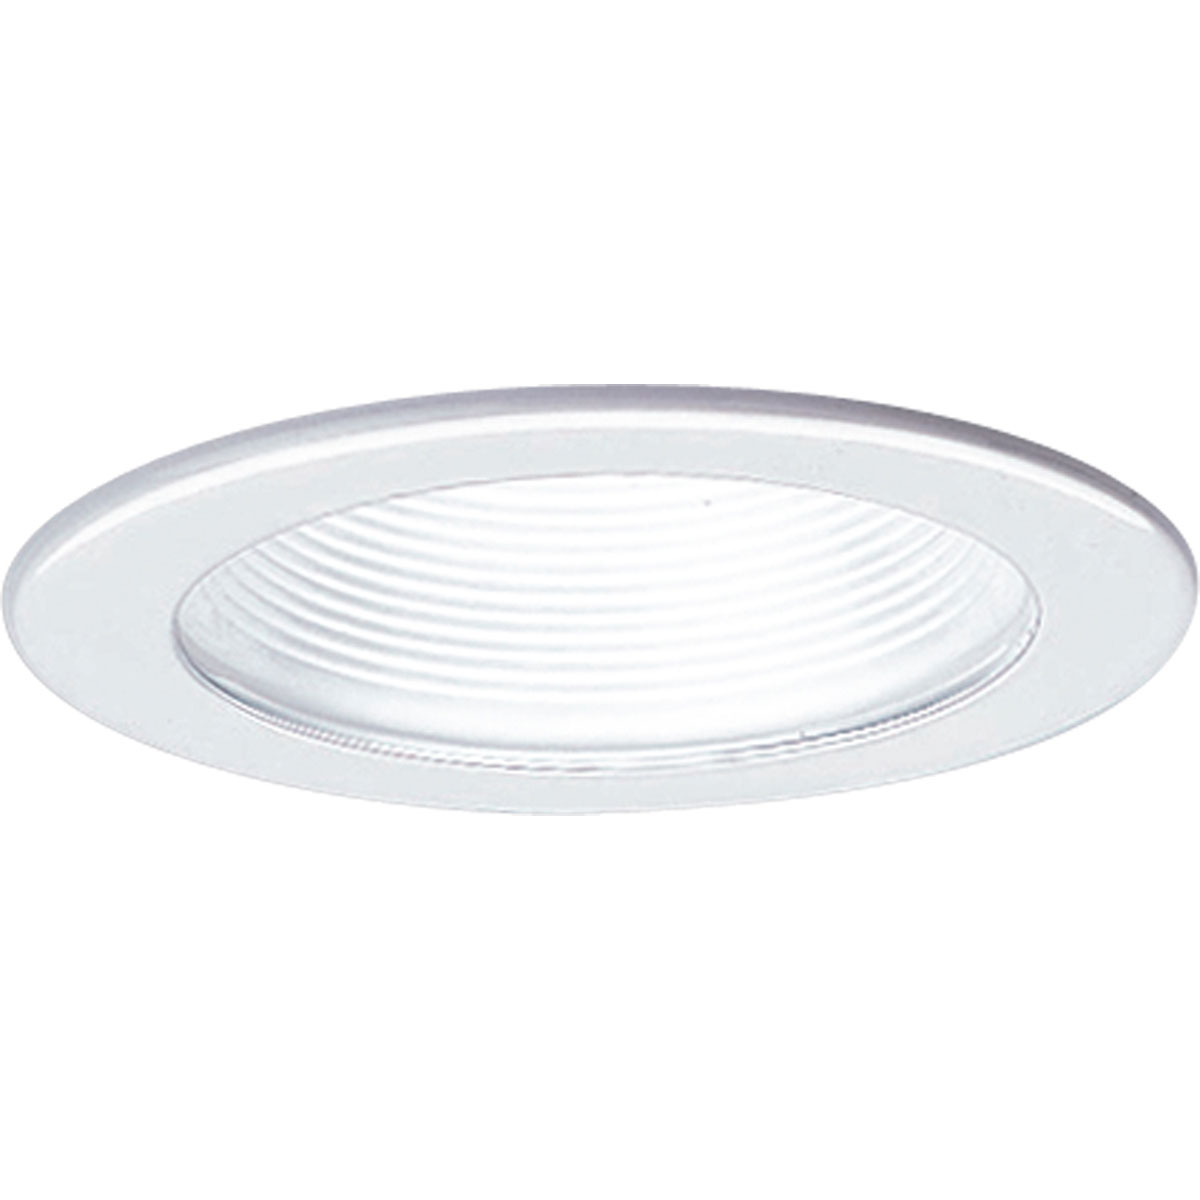 4 in step baffle trim in White finish with matching white powder coated flange. All trims have 360 positioning. Lamps tilt 30 max. 5 in outside diameter.